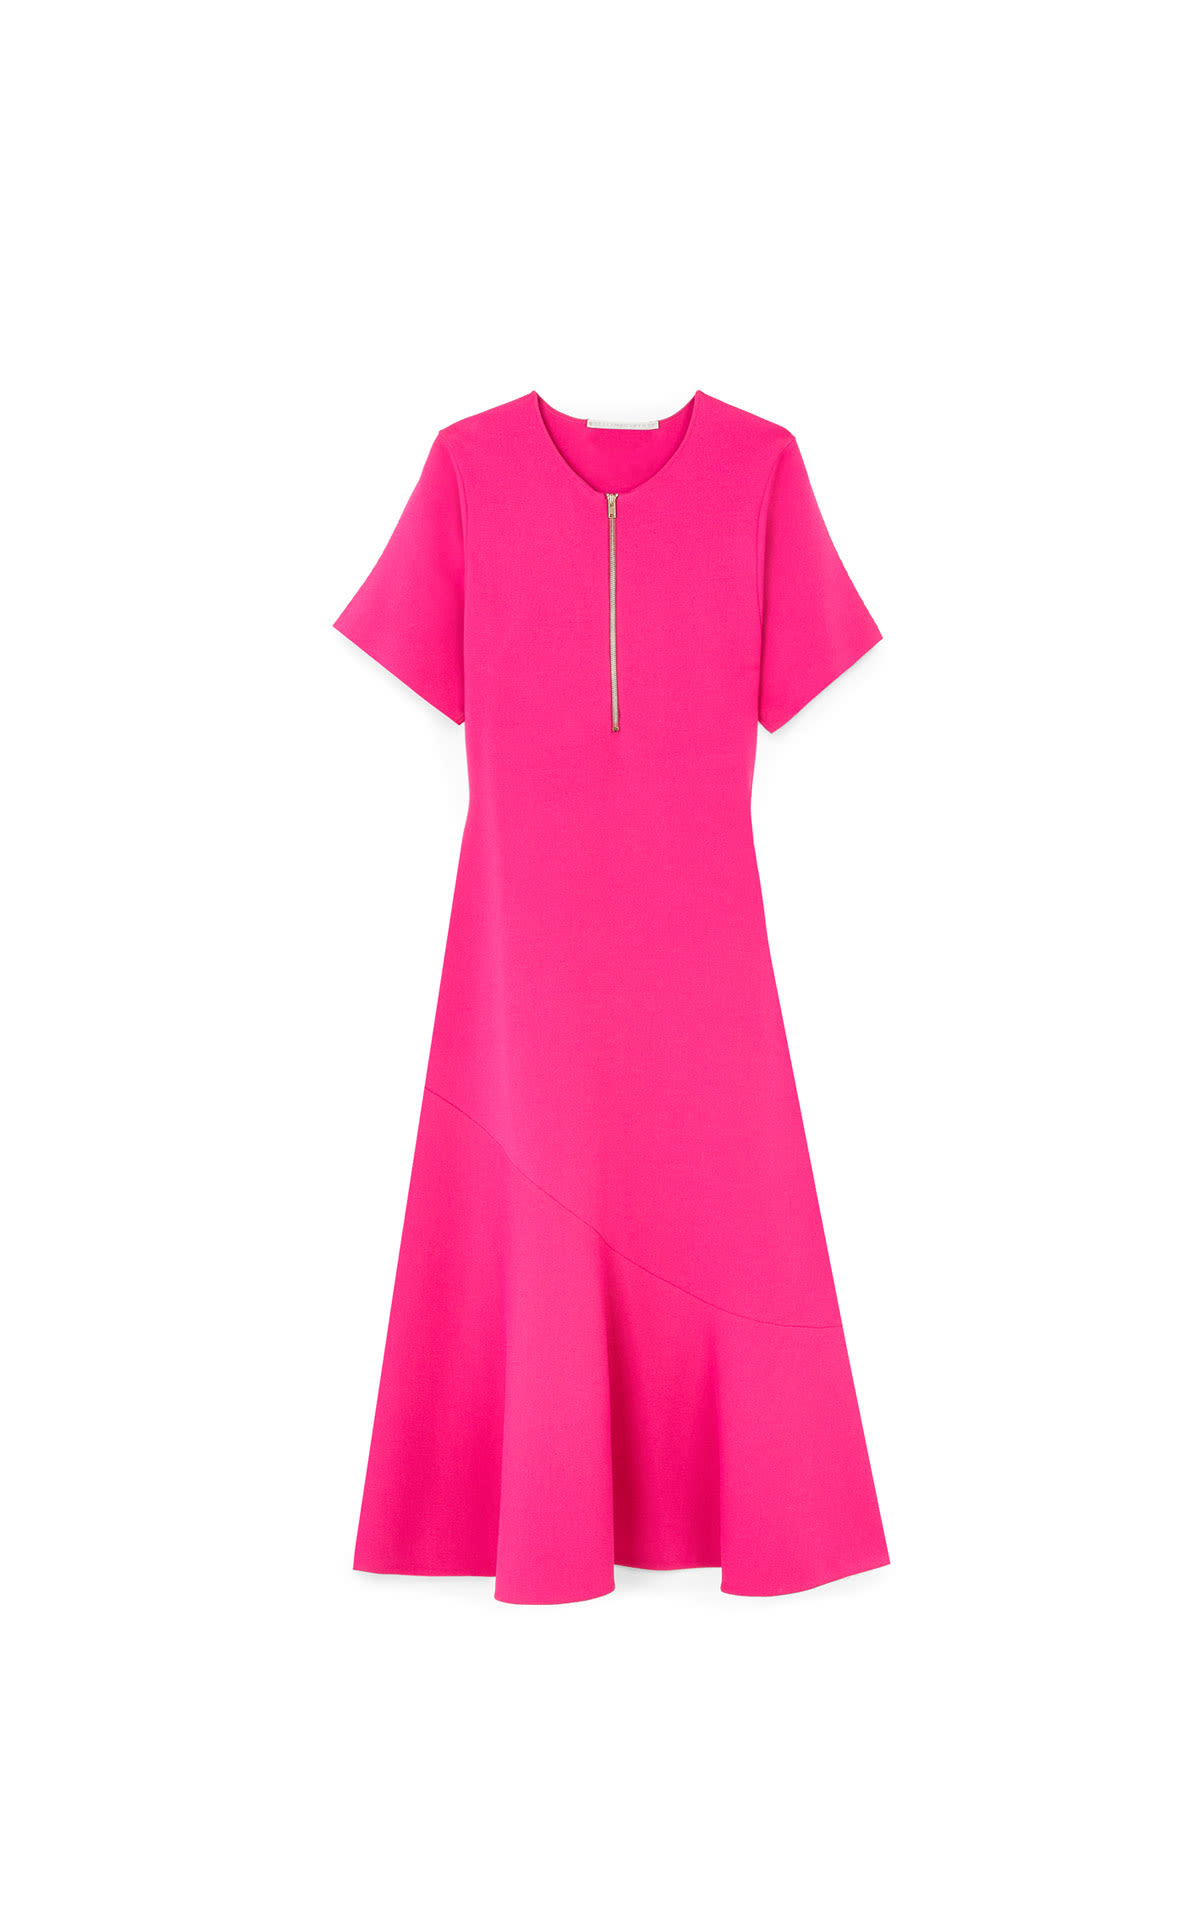 Stella McCartney Pink compact knit dress from Bicester Village